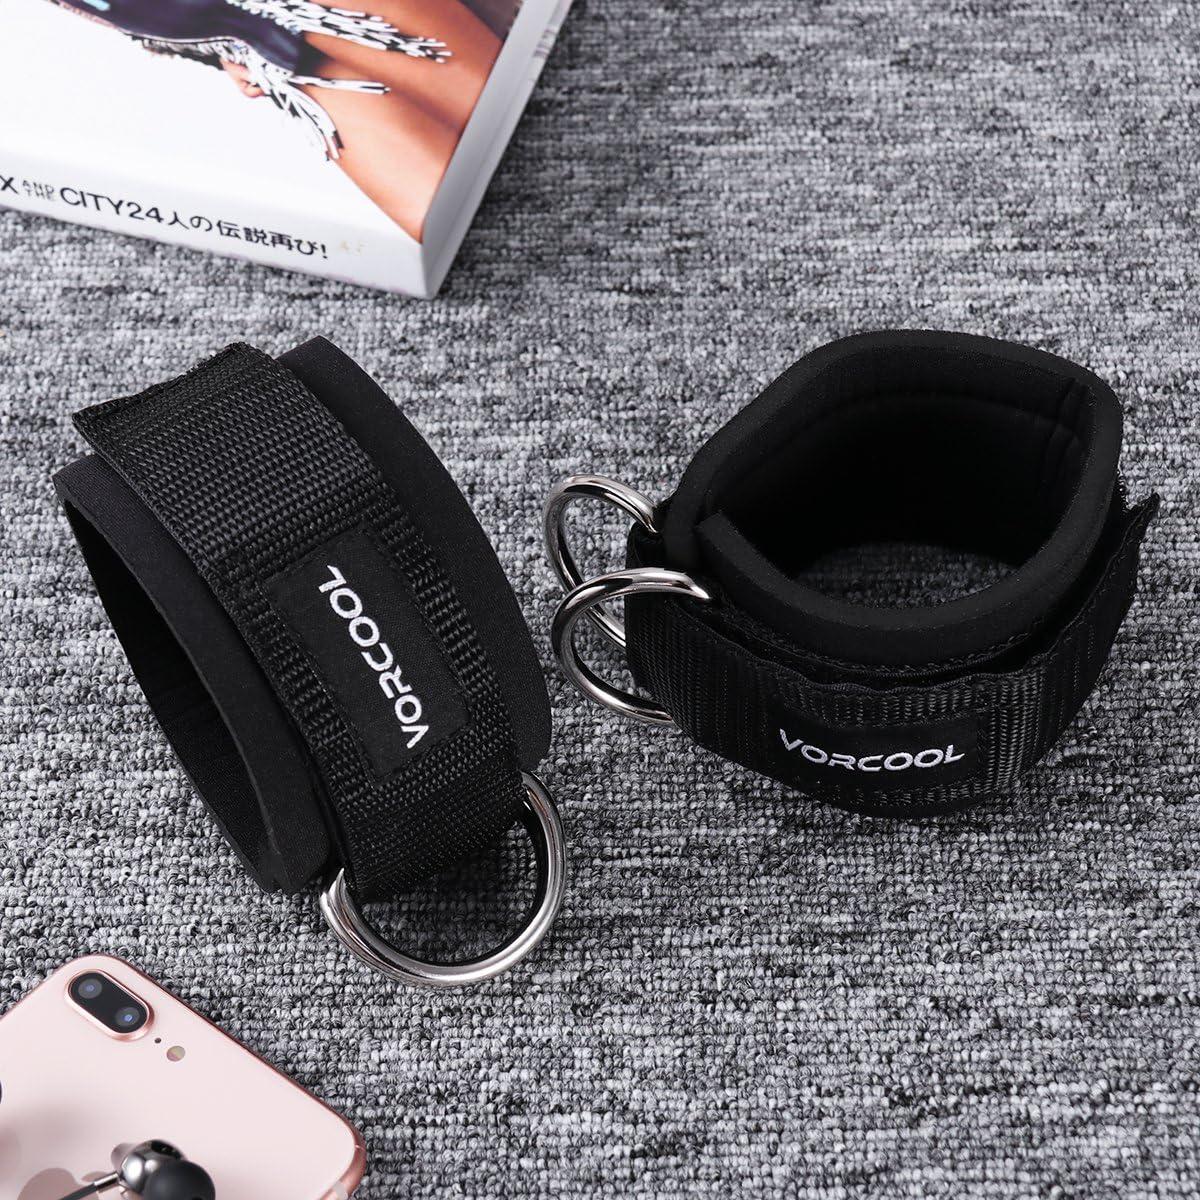 2Pcs Adjustable Ankle Straps for Cable Machine, Comfortable Gym